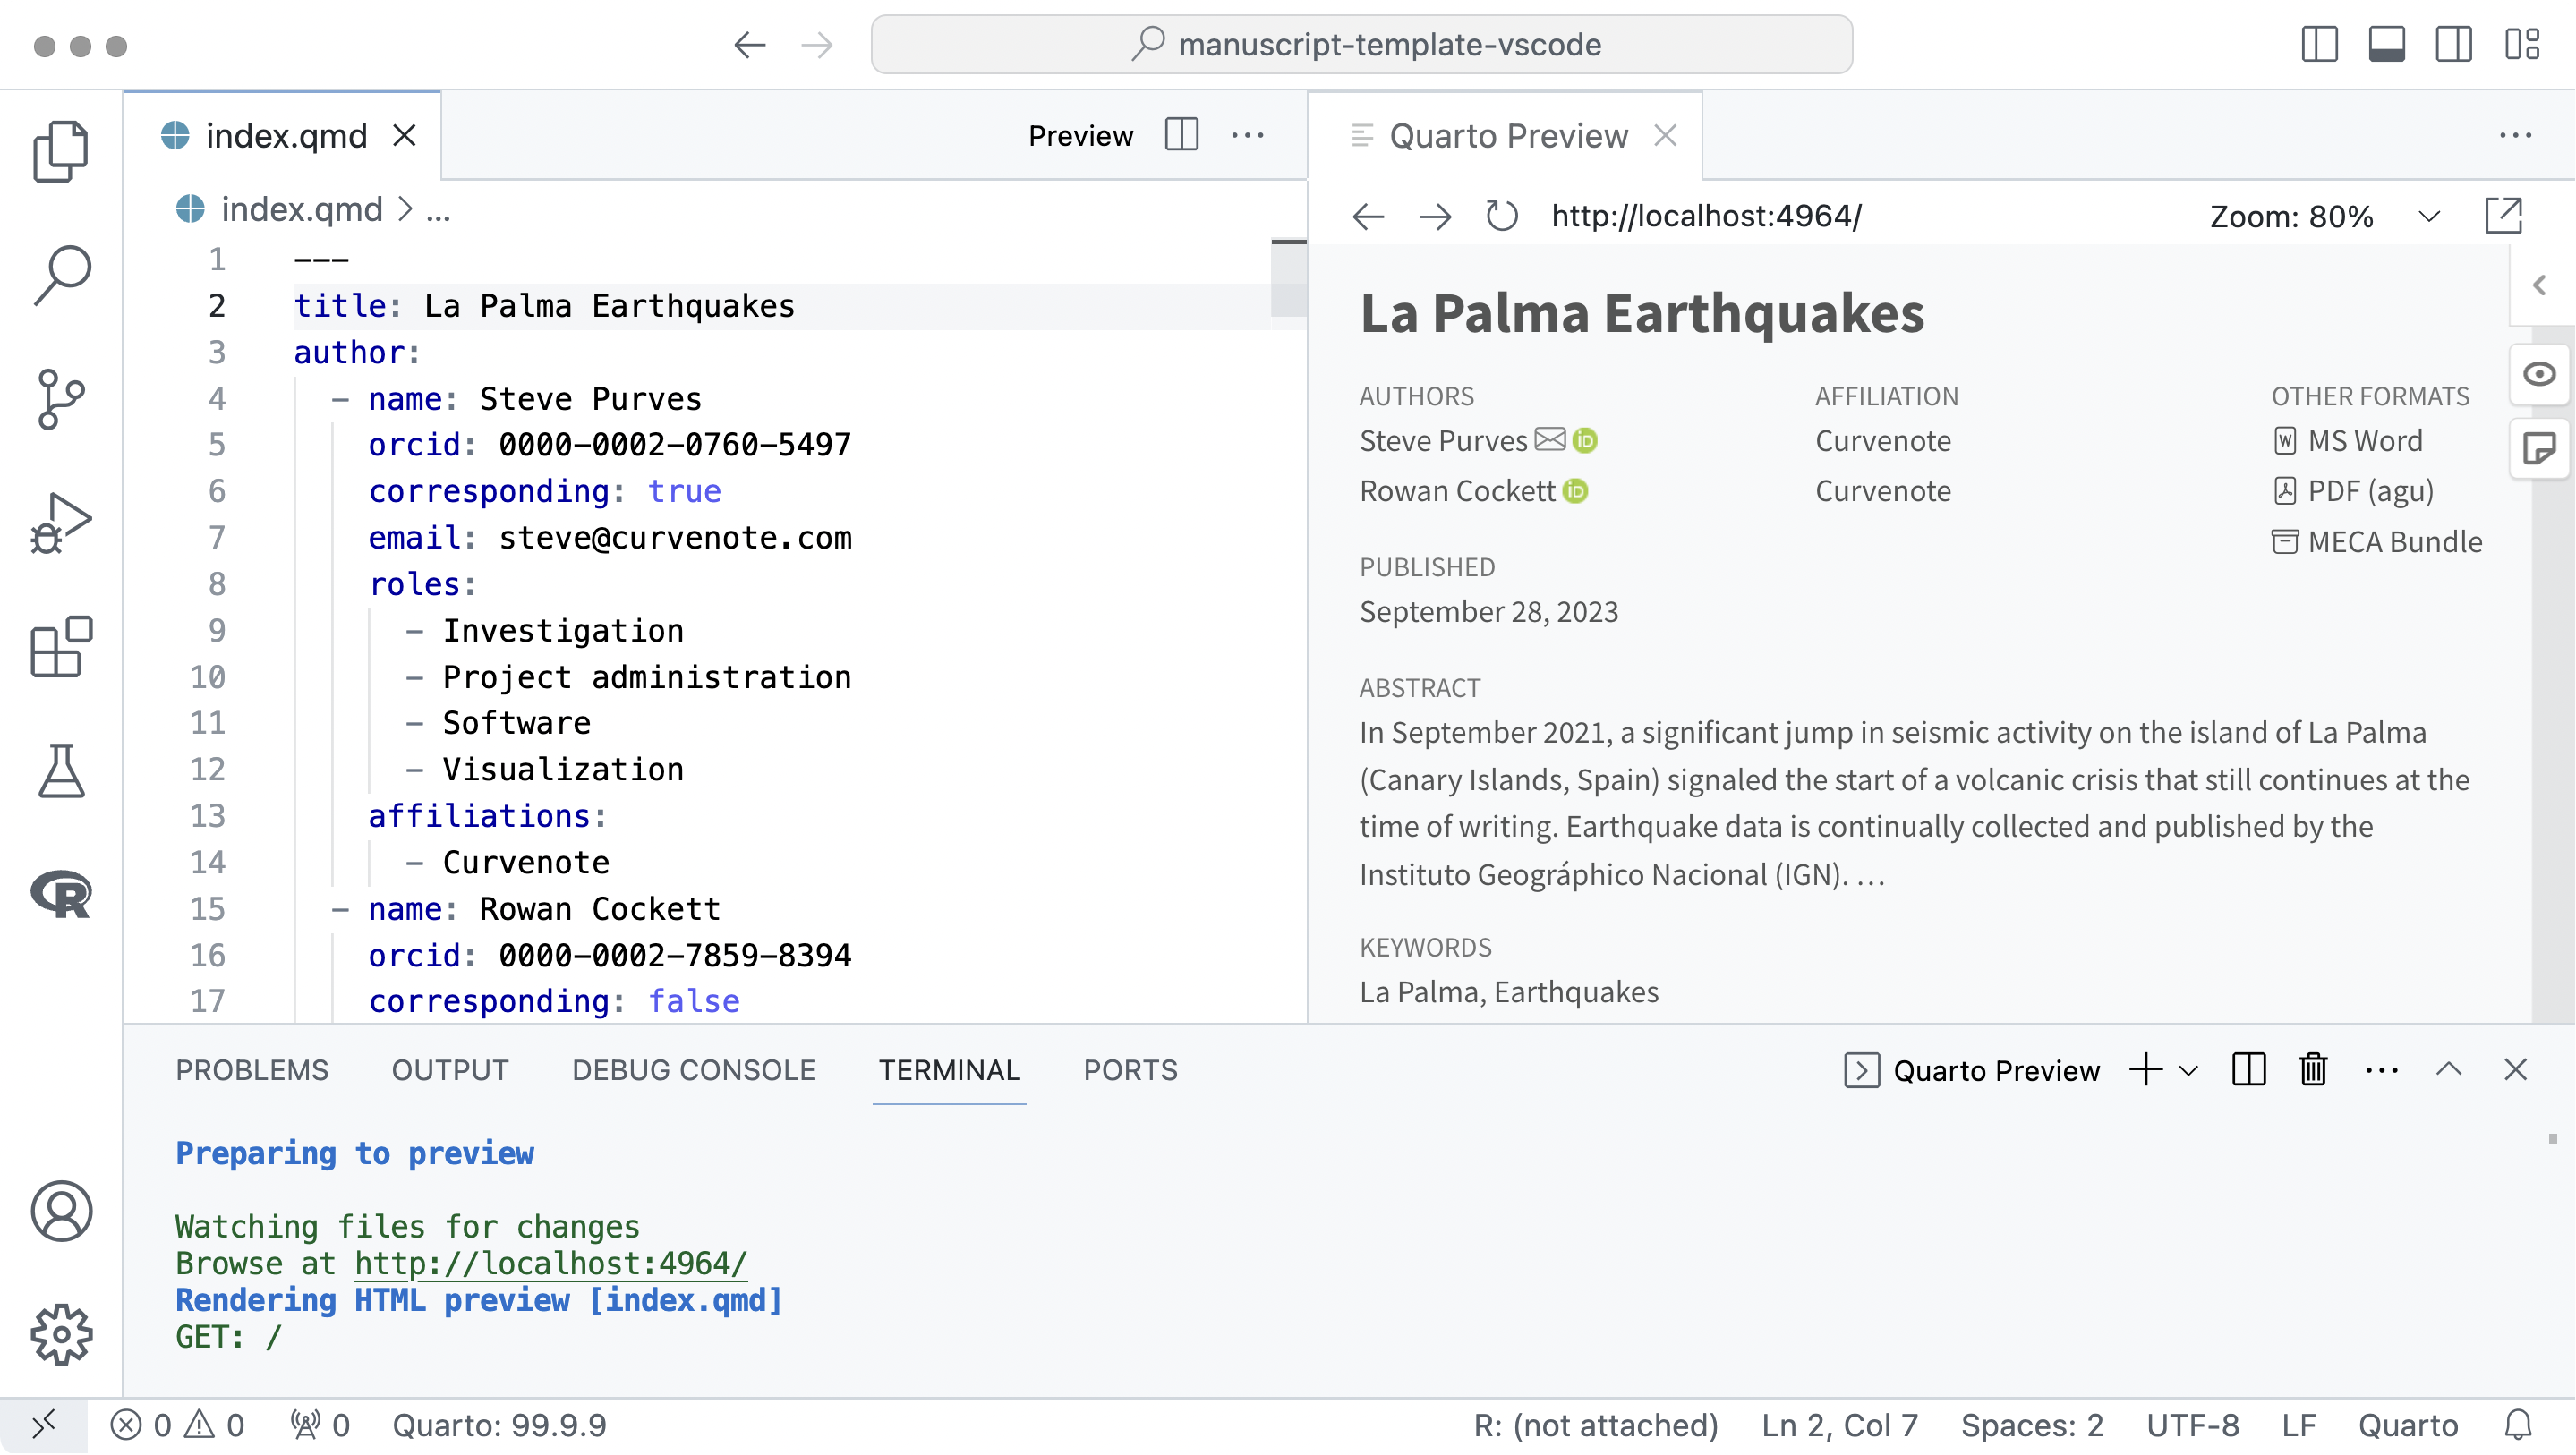 Screenshot of the VS Code. Open in an Editor pane is a file called index.qmd. Open in a pane titled Quarto Preivew is a website starting with the header La Palma Earthquakes.